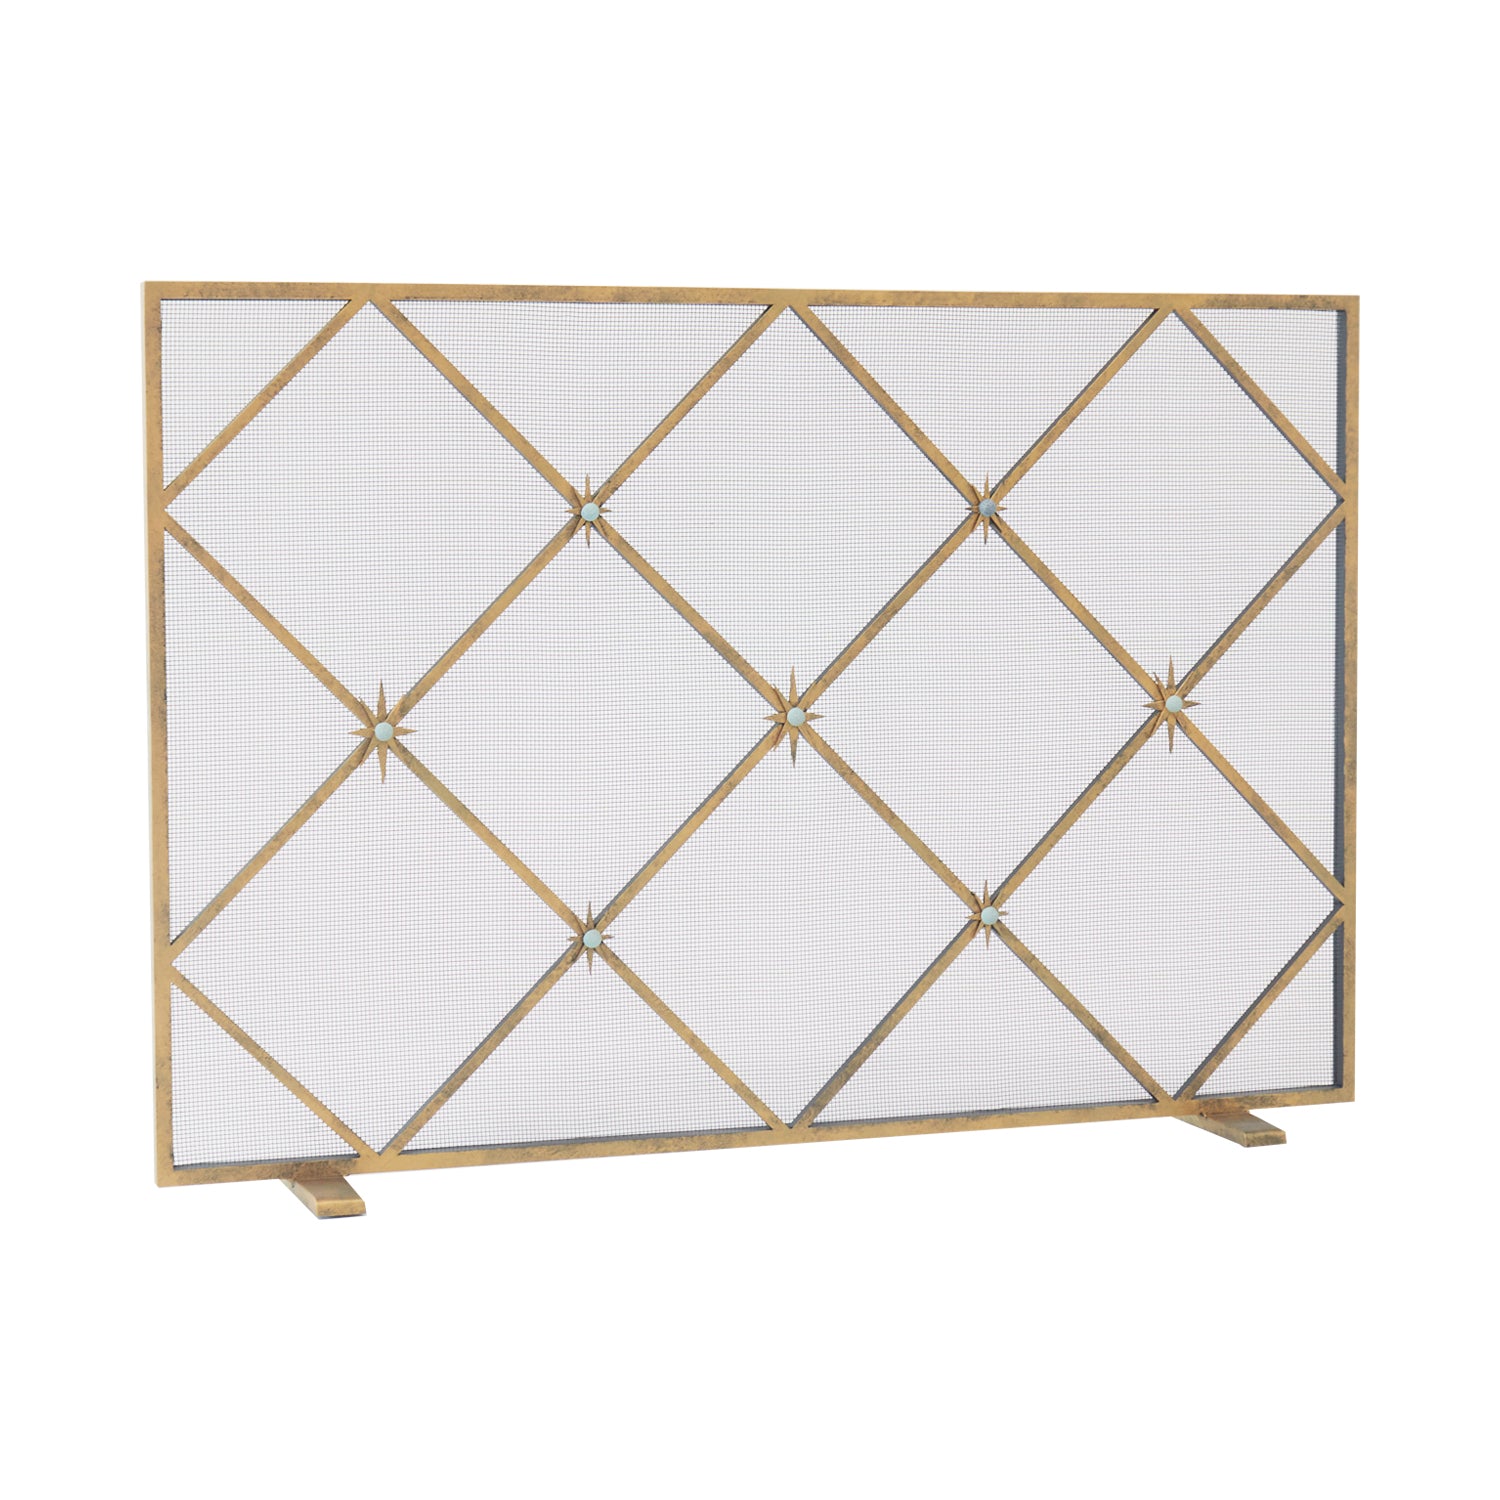 Celeste Fireplace screen angled in aged gold finish